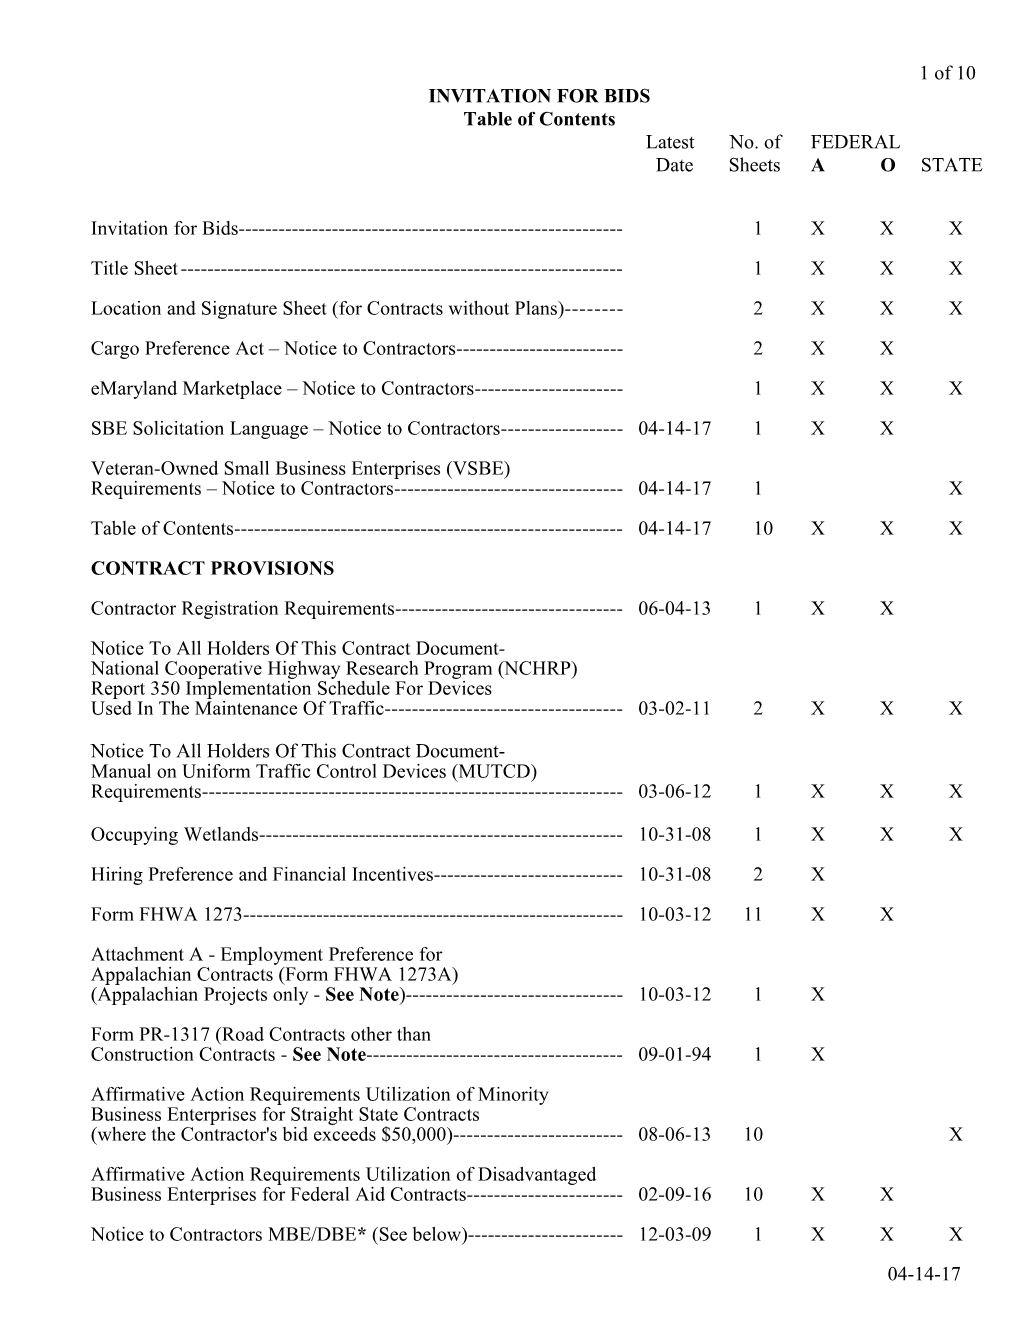 Table of Contents s36